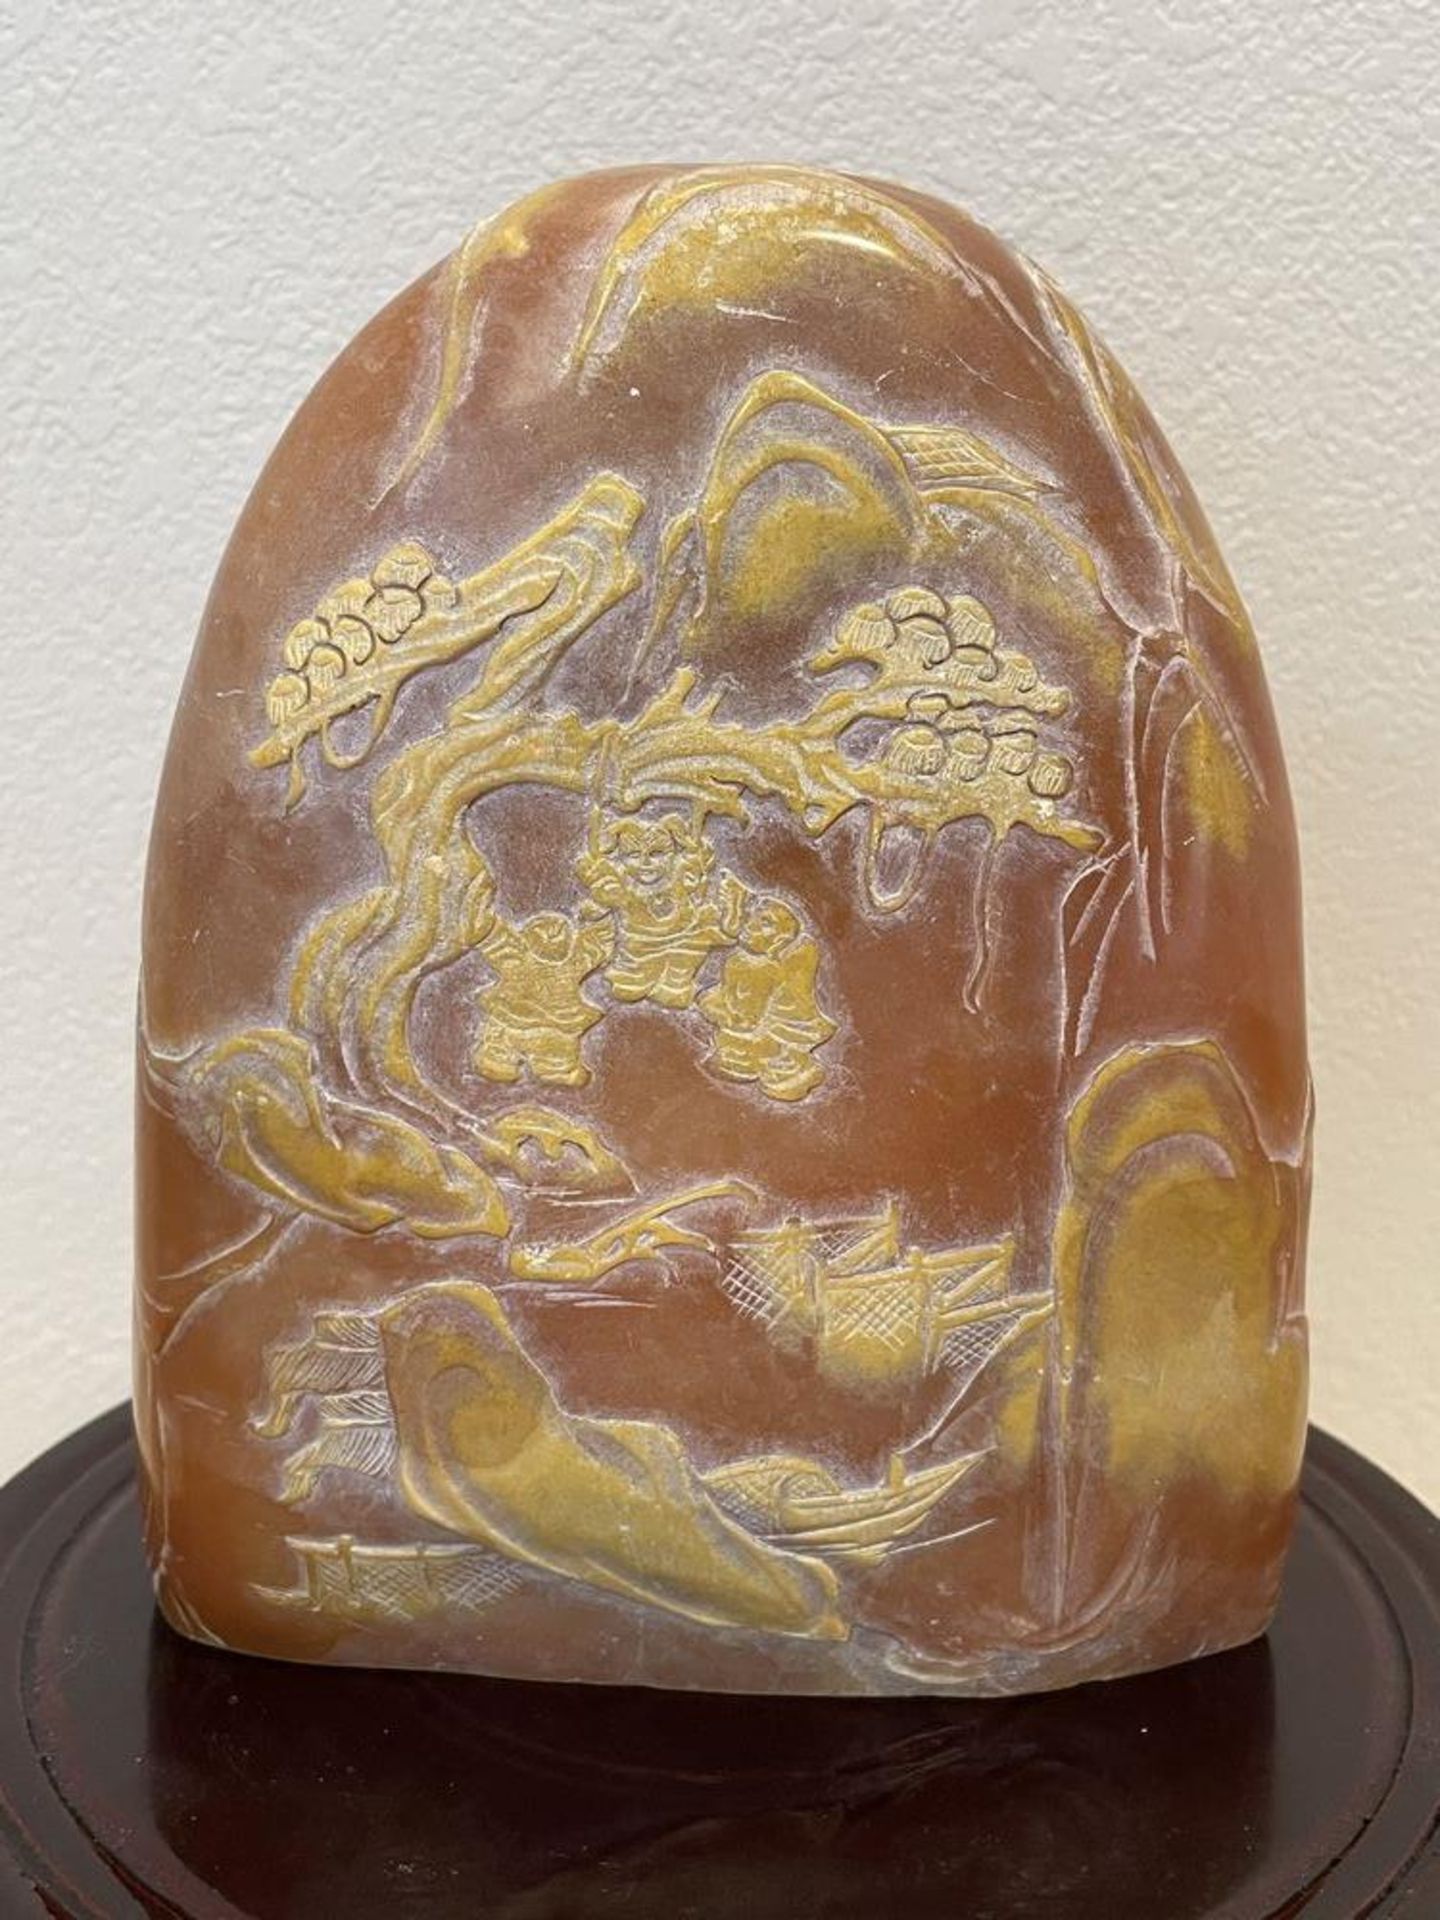 Orange/Amber Color East Asian Stone Sculpture on wood stand, Heavy/Cold Stone - Image 4 of 7